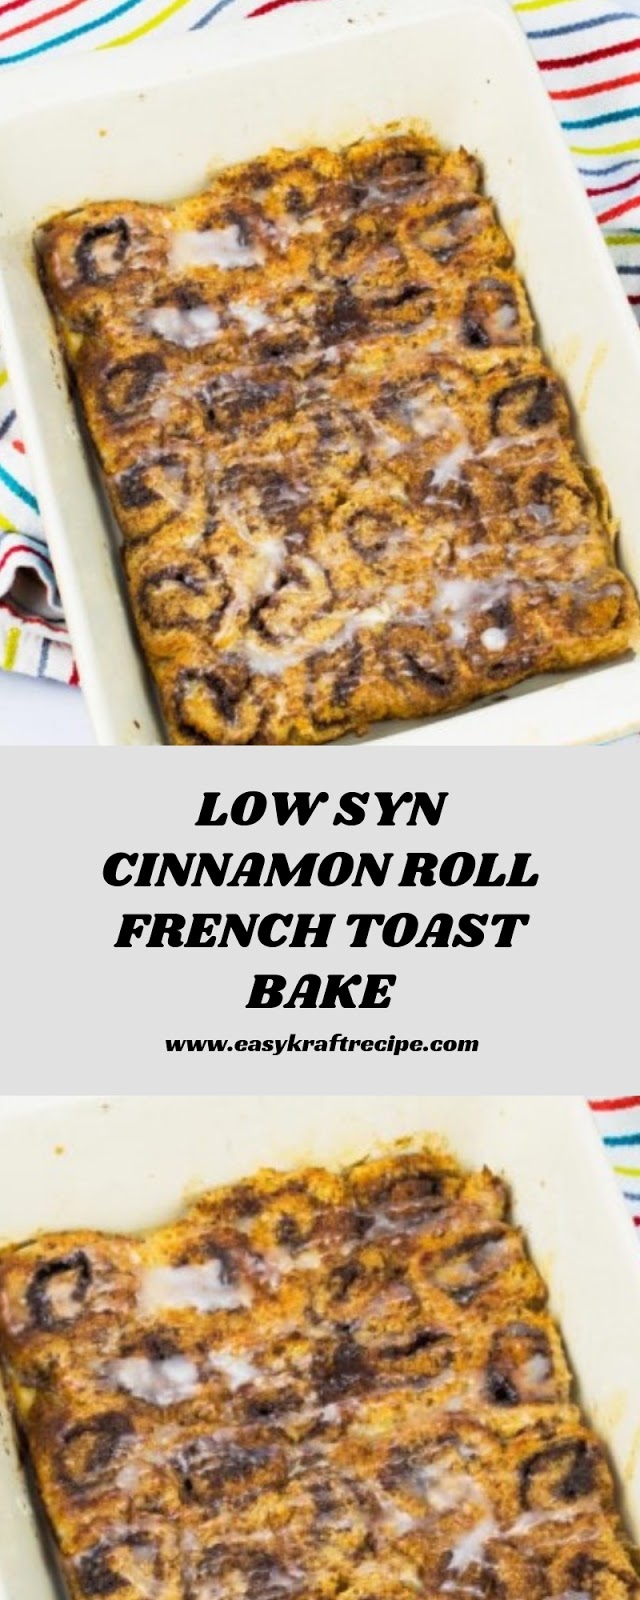 LOW SYN CINNAMON ROLL FRENCH TOAST BAKE